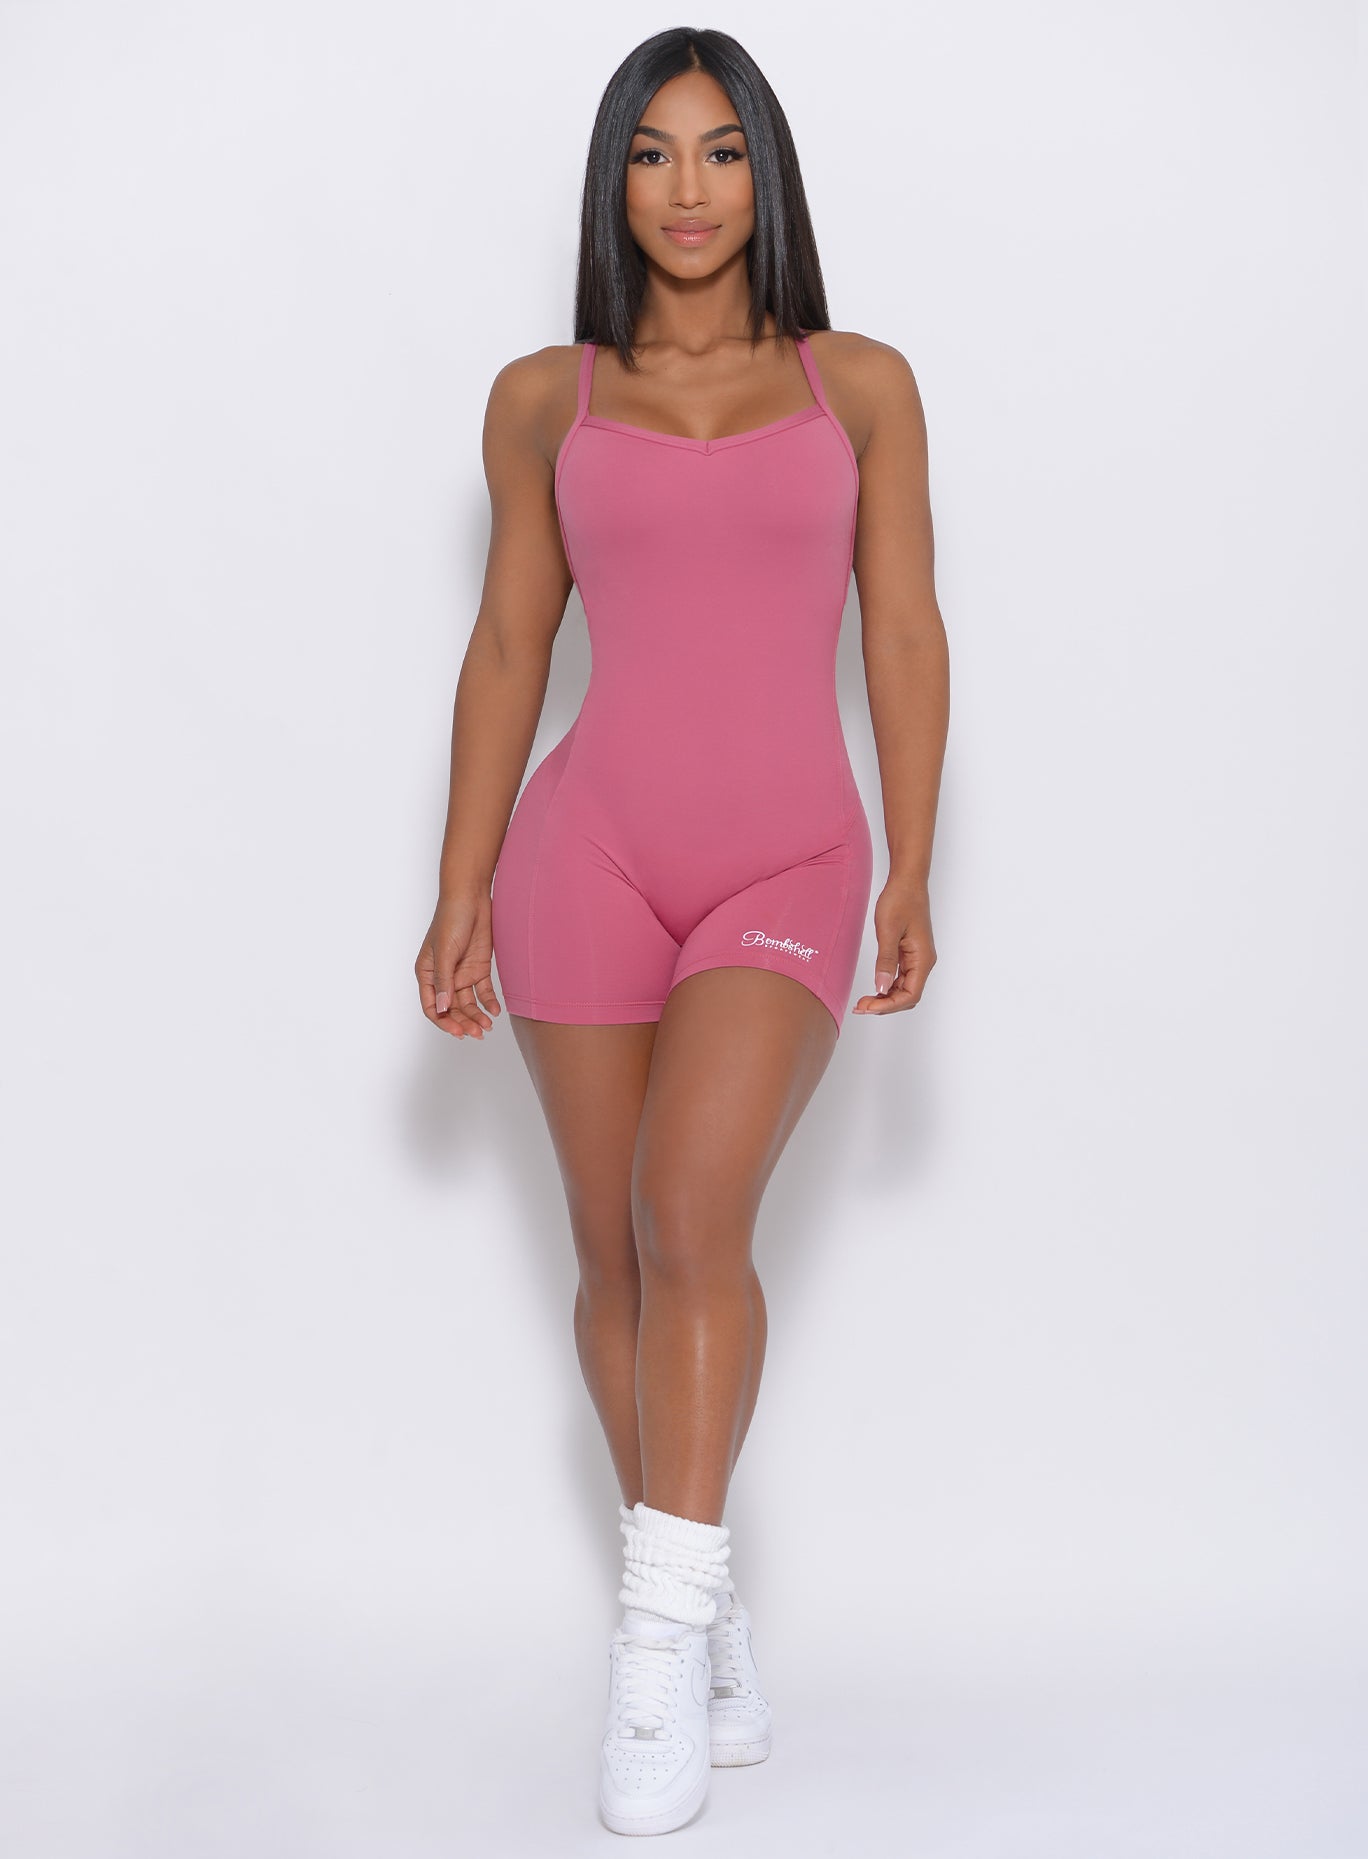 At vise Mantle Pacific Sculpted Bodysuit Shorts – Bombshell Sportswear